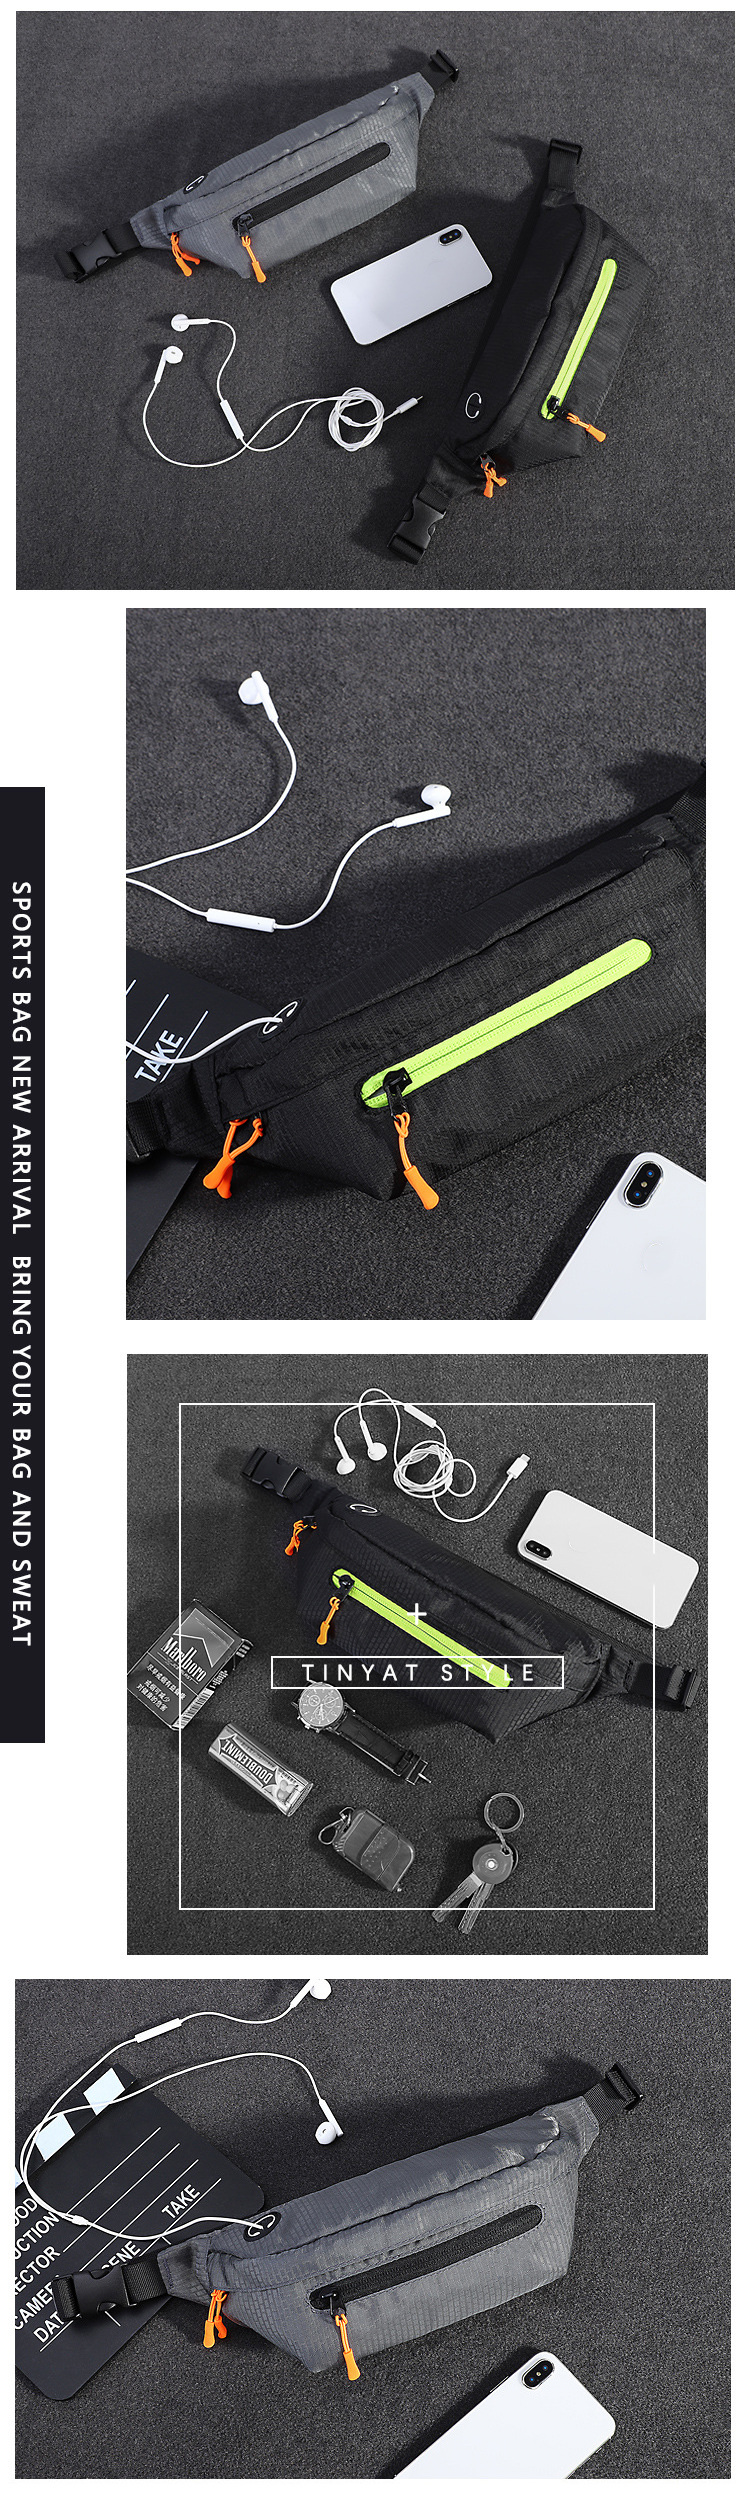 Bakeey-Waterproof-Outdoor-Sport-Night-Running-with-Multi-Pockets-Reflective-Stripe-Headphone-Hole-Mo-1688590-7